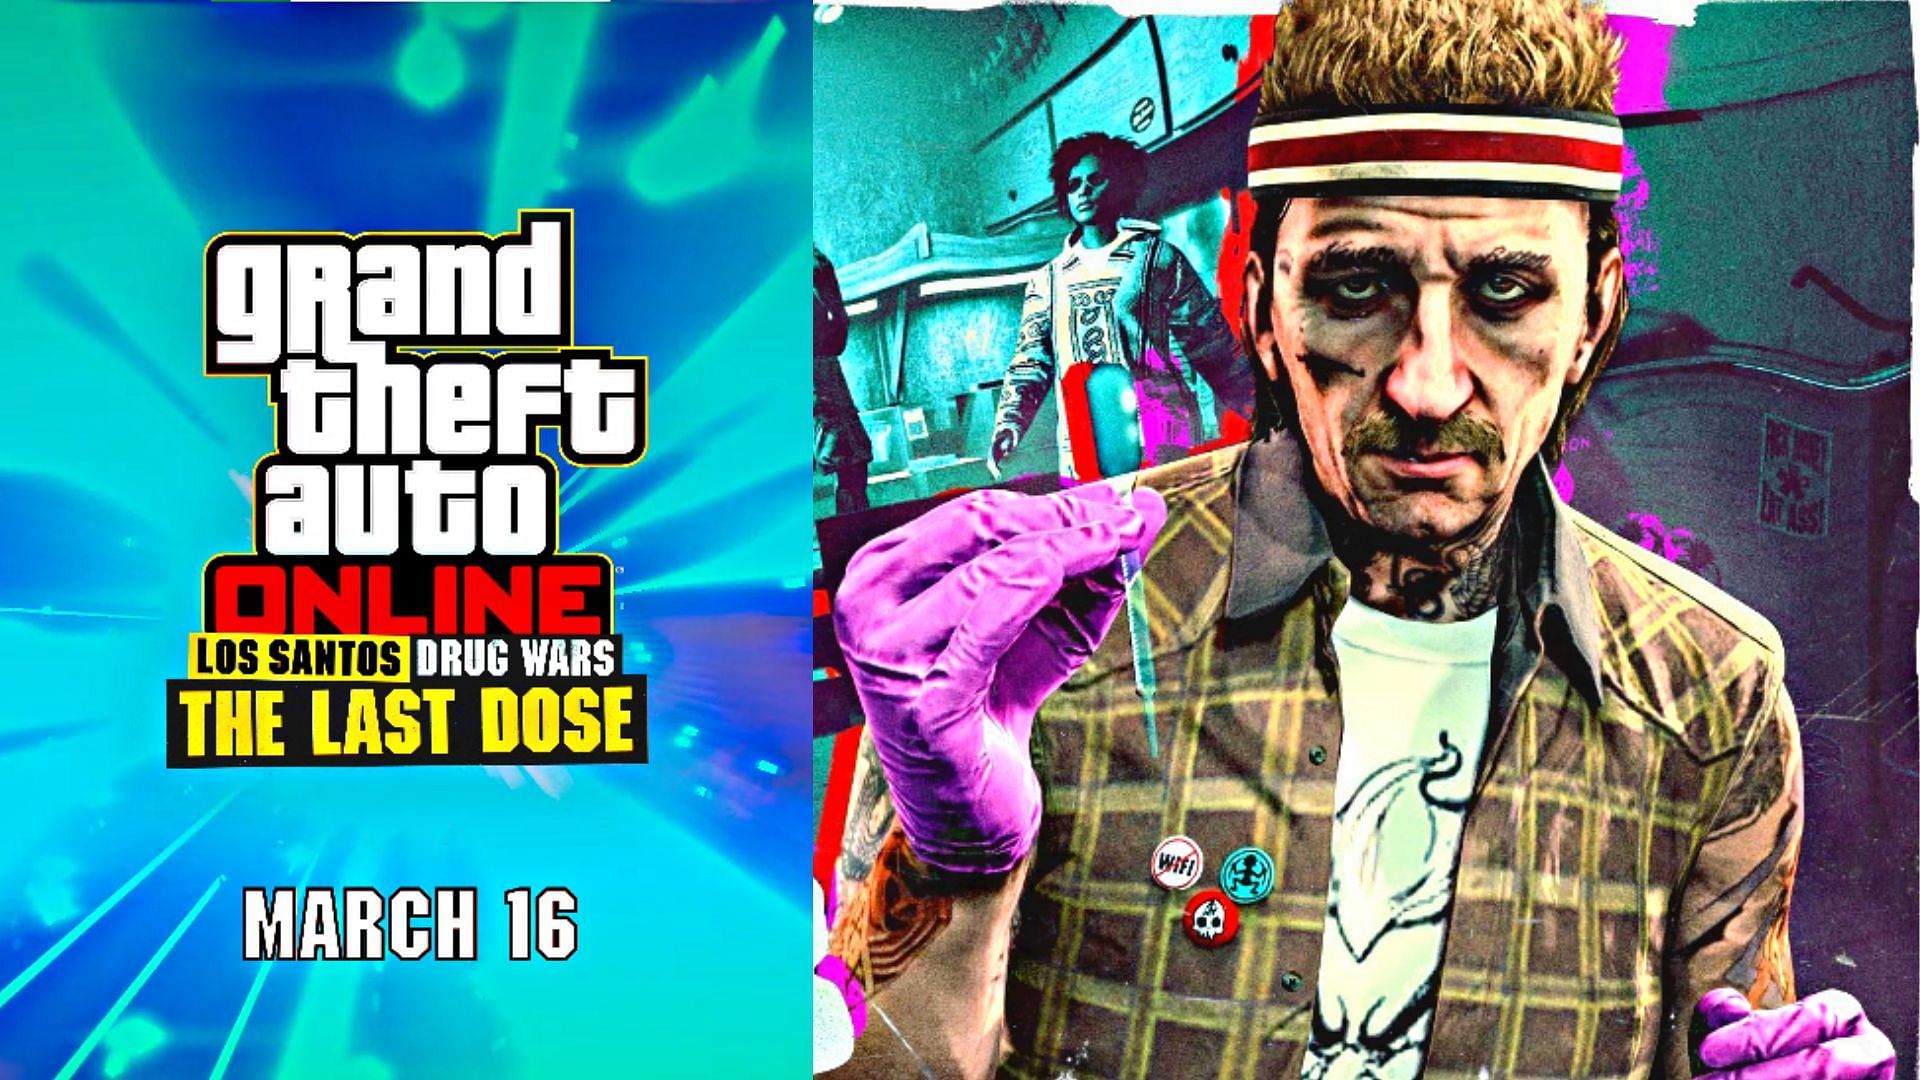 The Last Dose missions are now live in GTA Online today (Image via Rockstar Games)